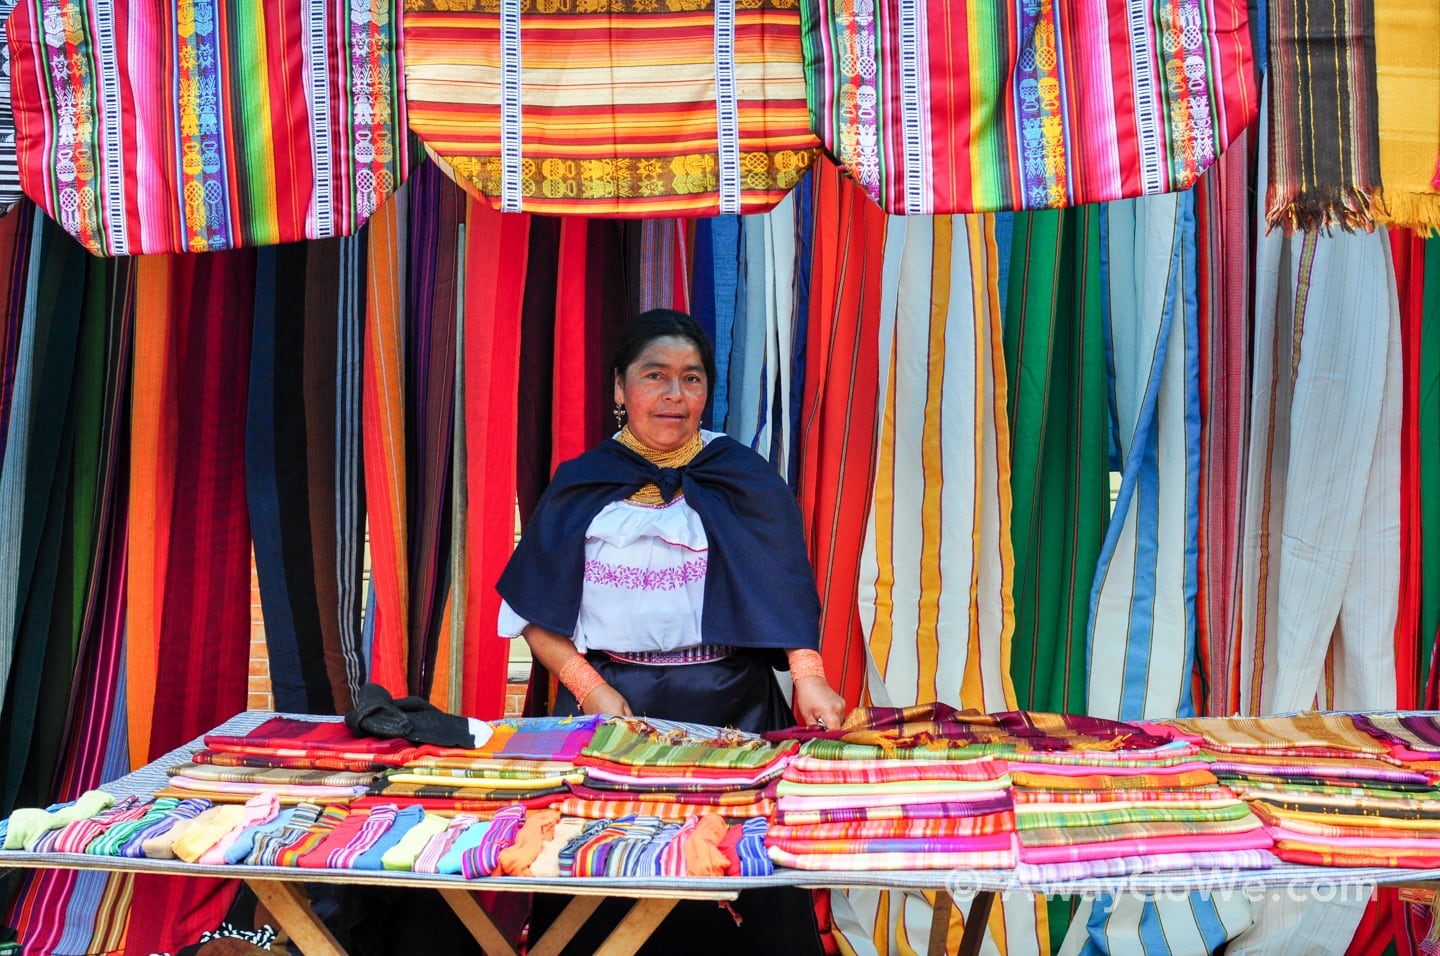 Andean woman and colorful textiles